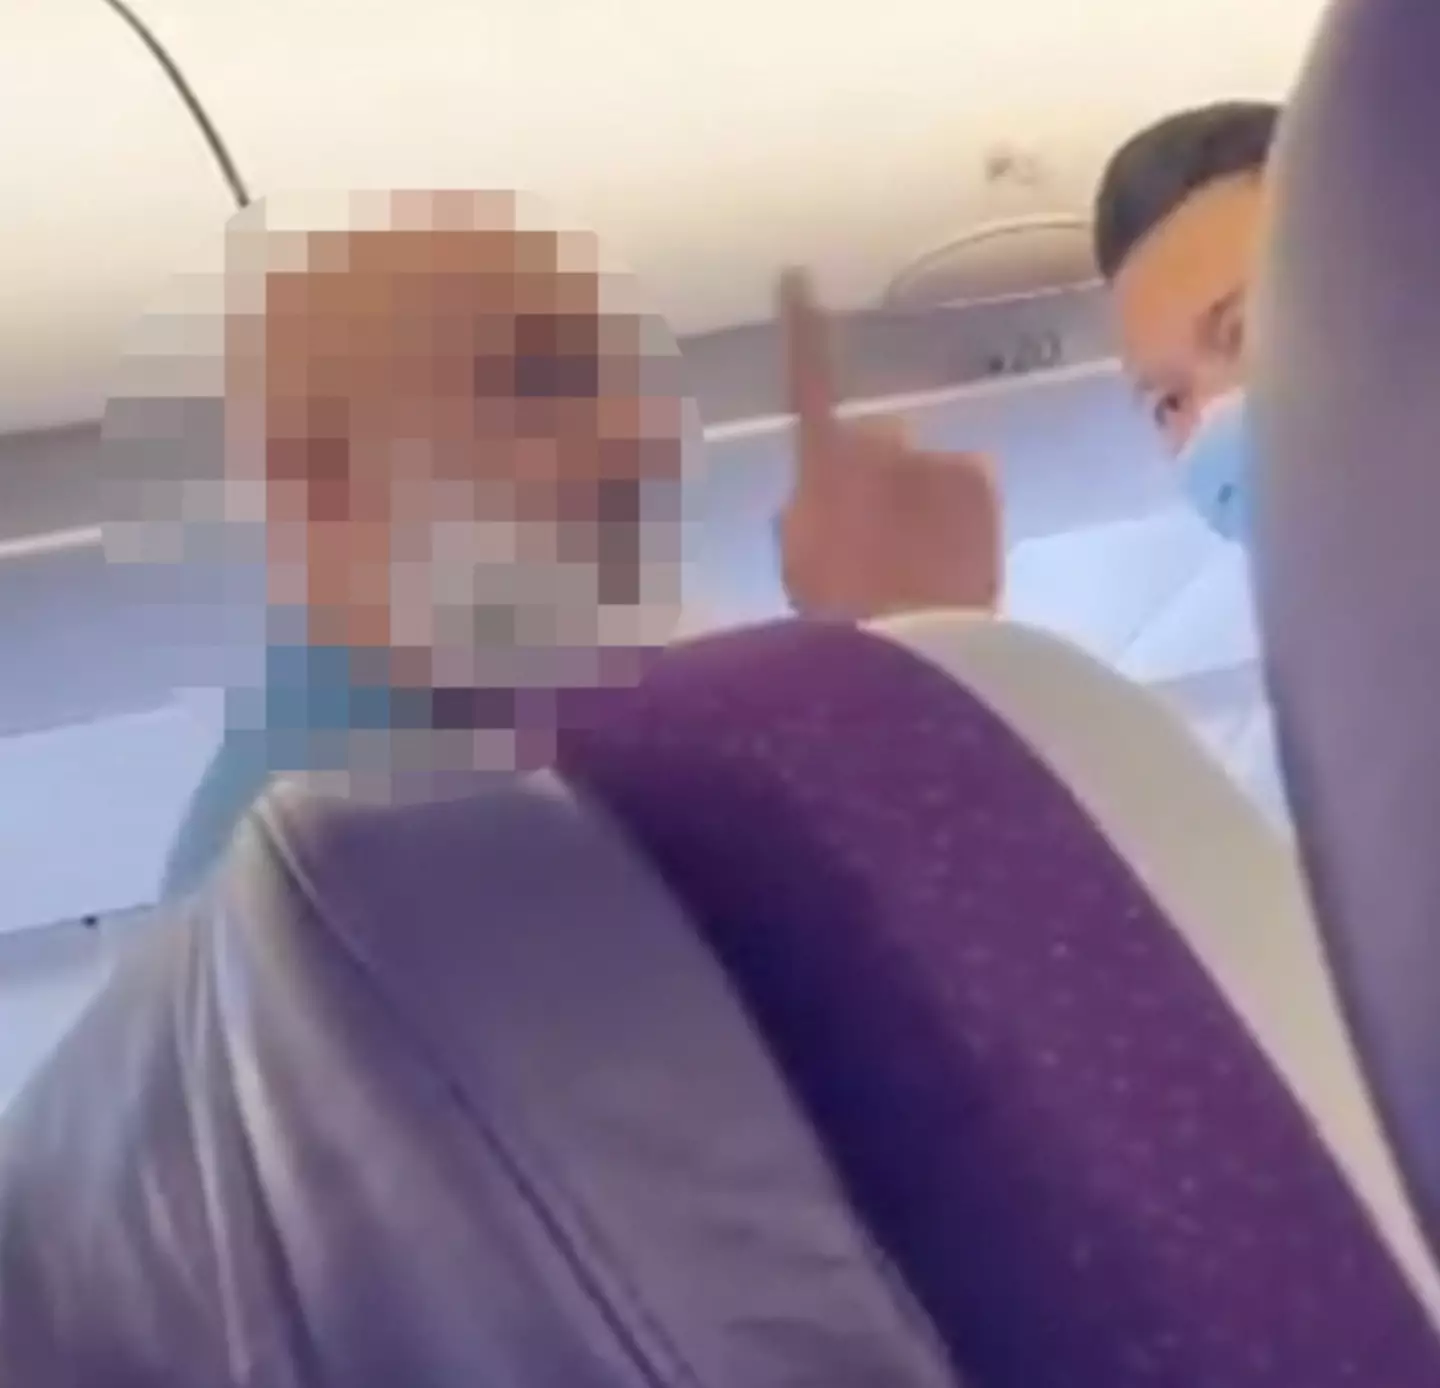 The unnamed man was seen berating passengers and staff.